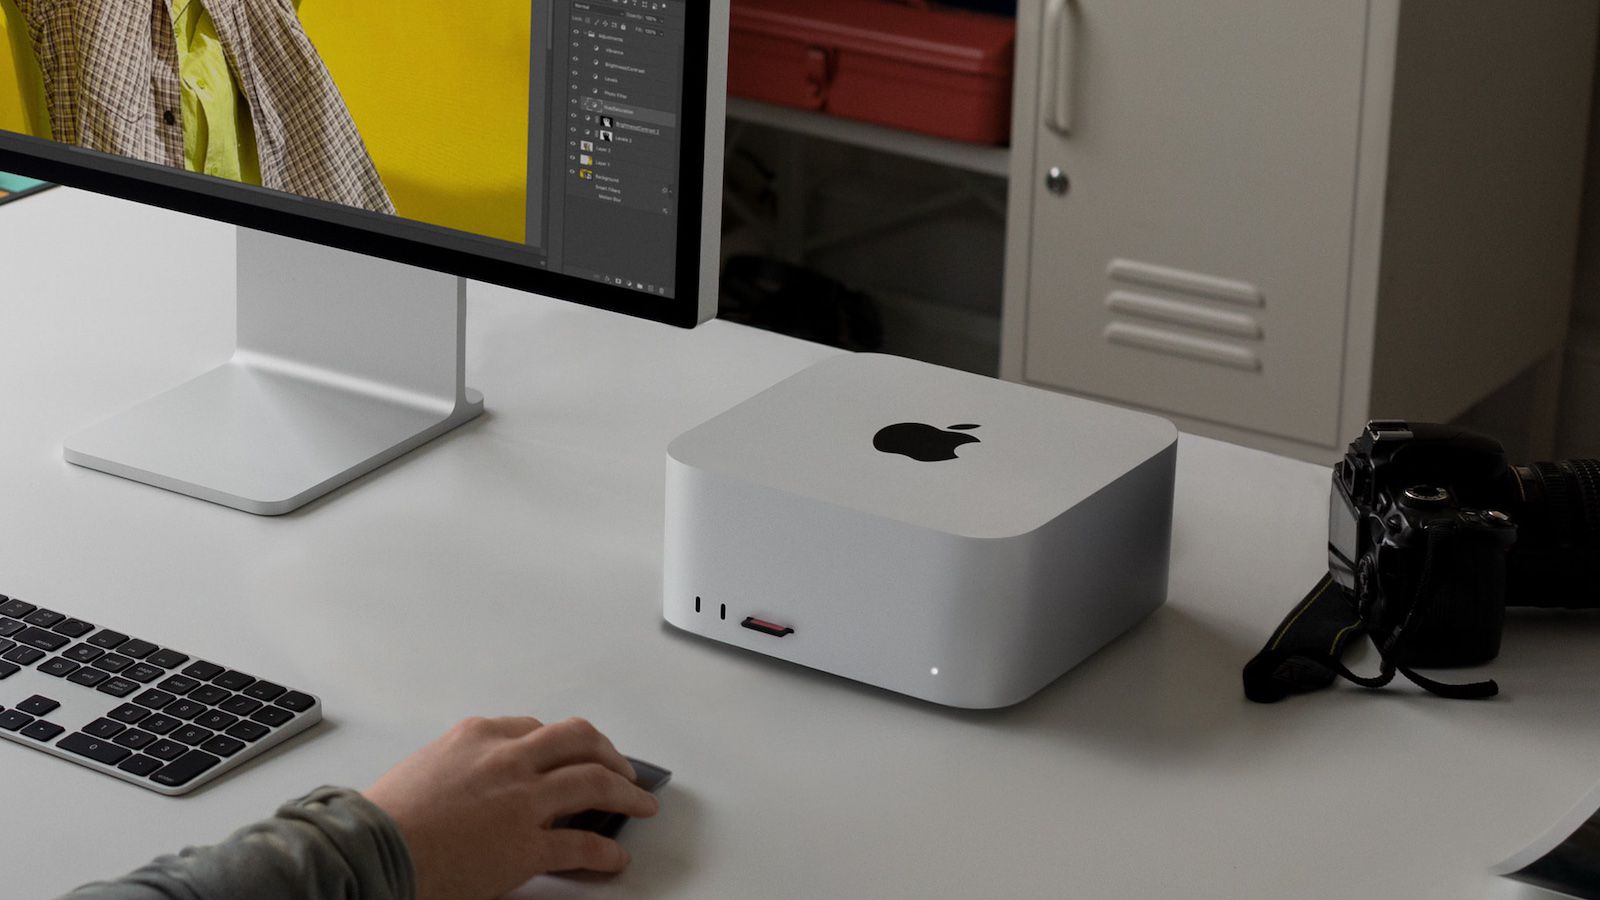 M2 Pro Mac Mini Specs: Up to 32GB of RAM, Up to Three External Displays,  240Hz Support, and More - MacRumors